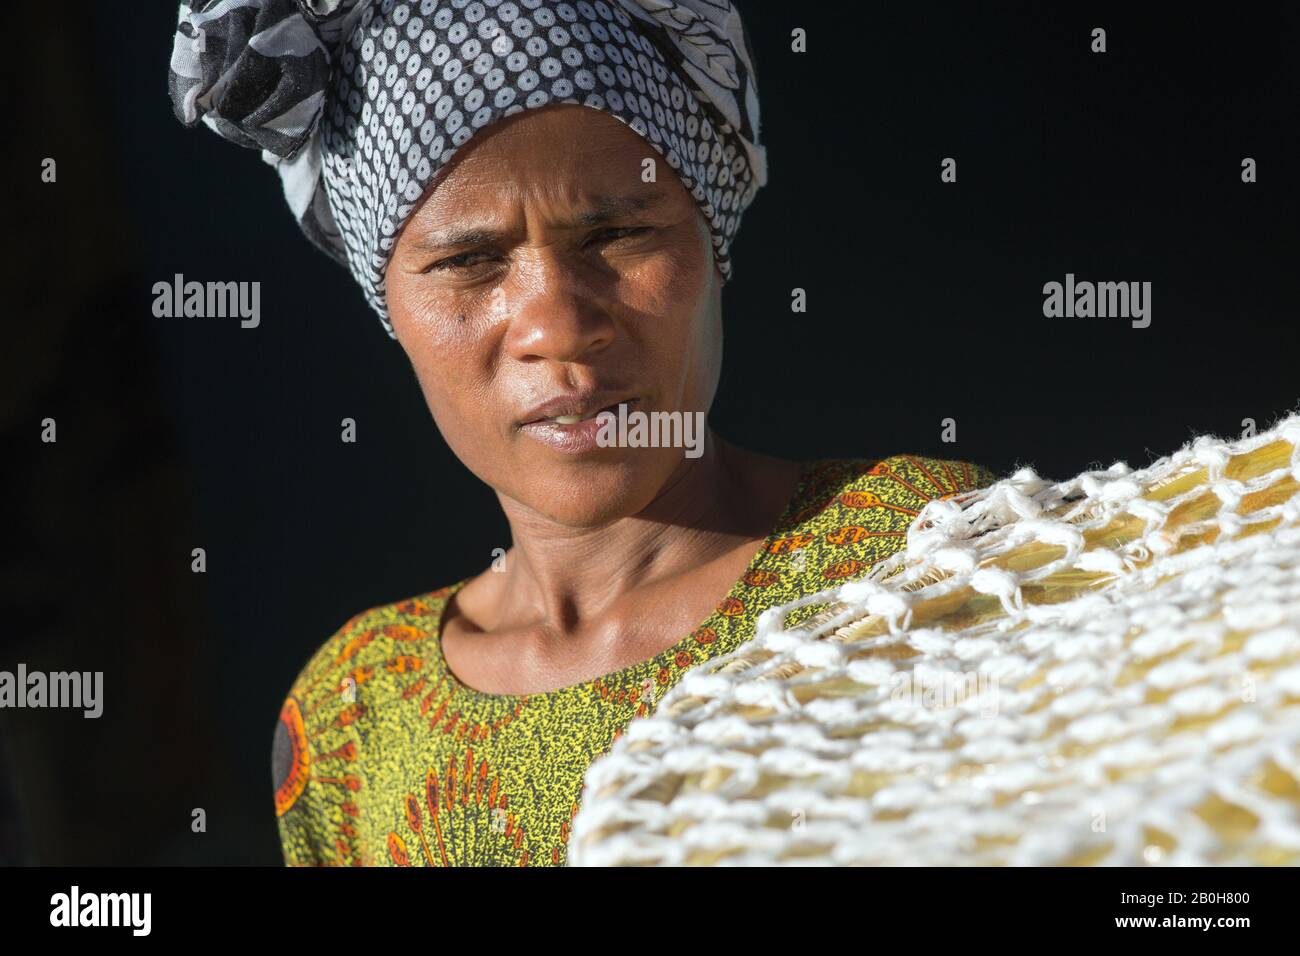 07.11.2019, Adama, Oromiyaa, Ethiopia - Production of the local sourdough bread Indjira. Packed under a foil, the bread is carried to the customer. Wo Stock Photo